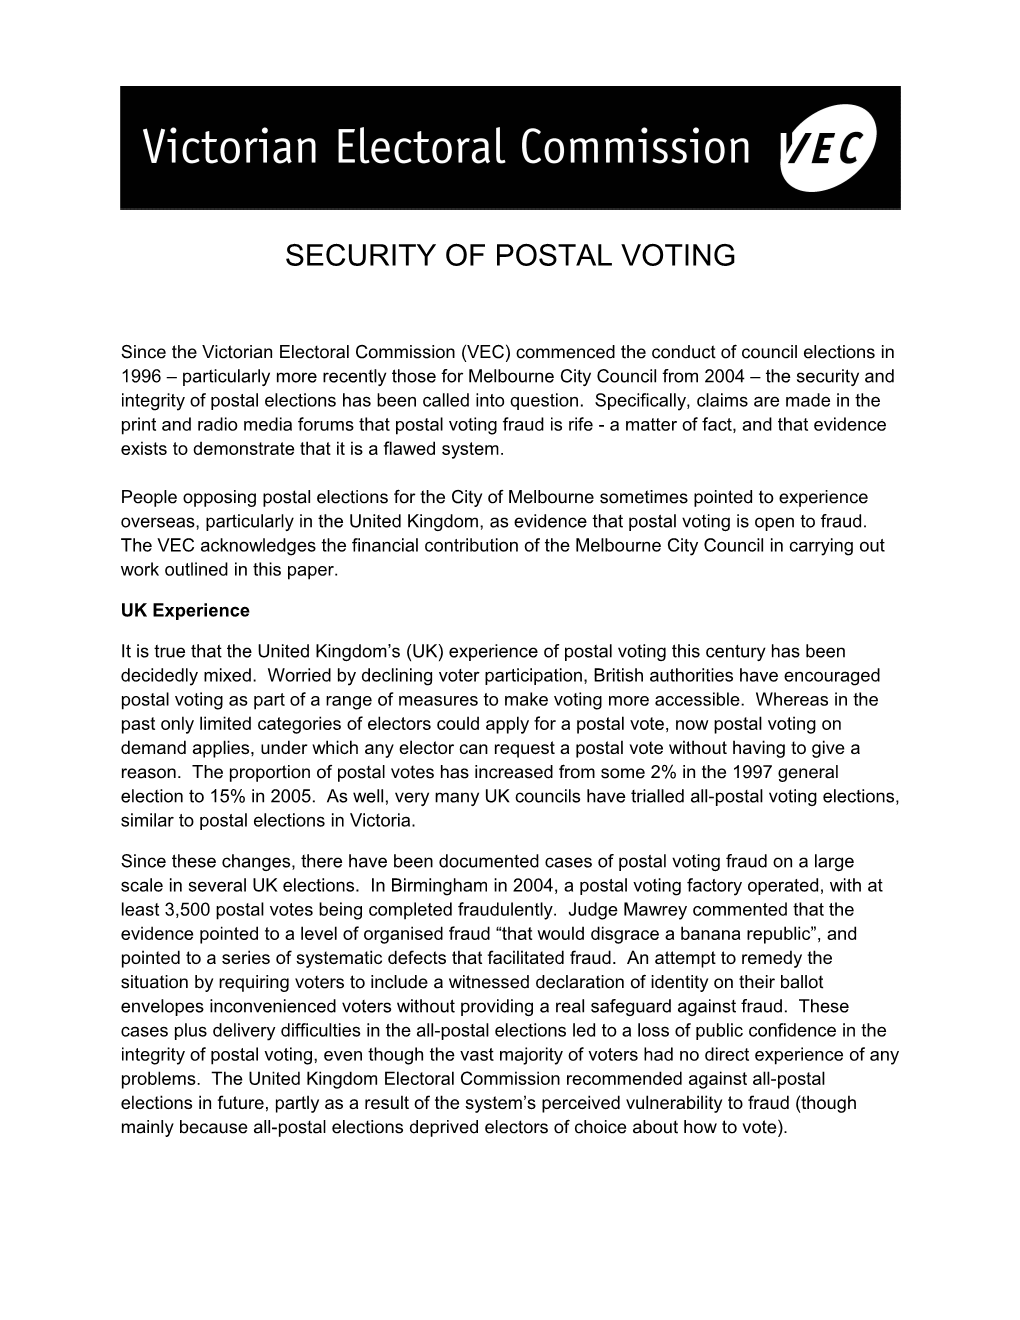 Security of Postal Voting